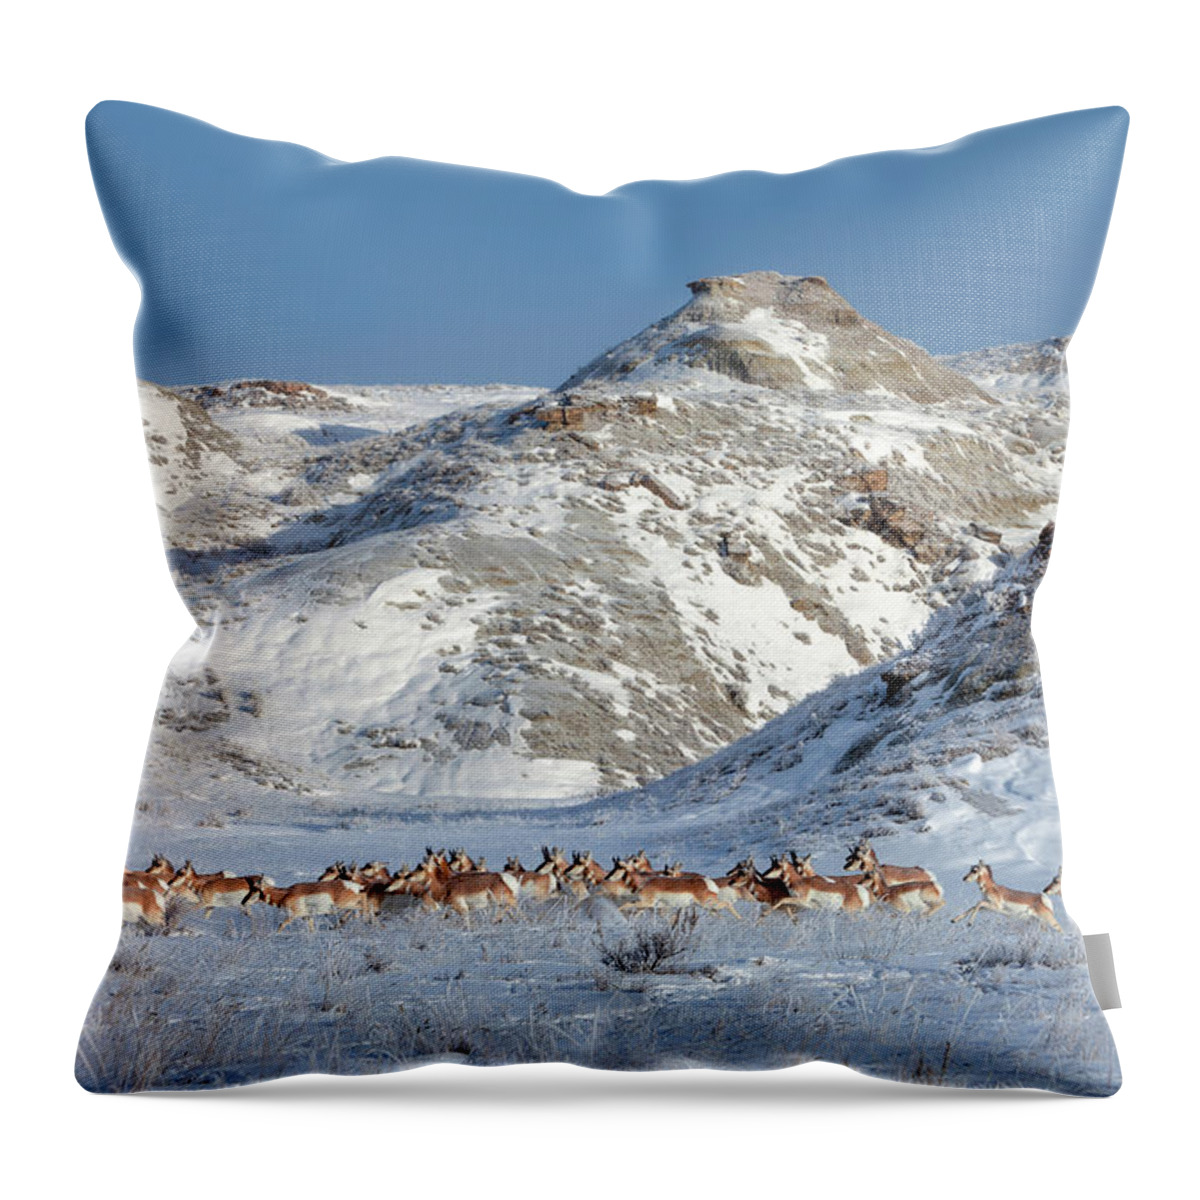 Badlands Throw Pillow featuring the photograph Badlands Antelope by Todd Klassy